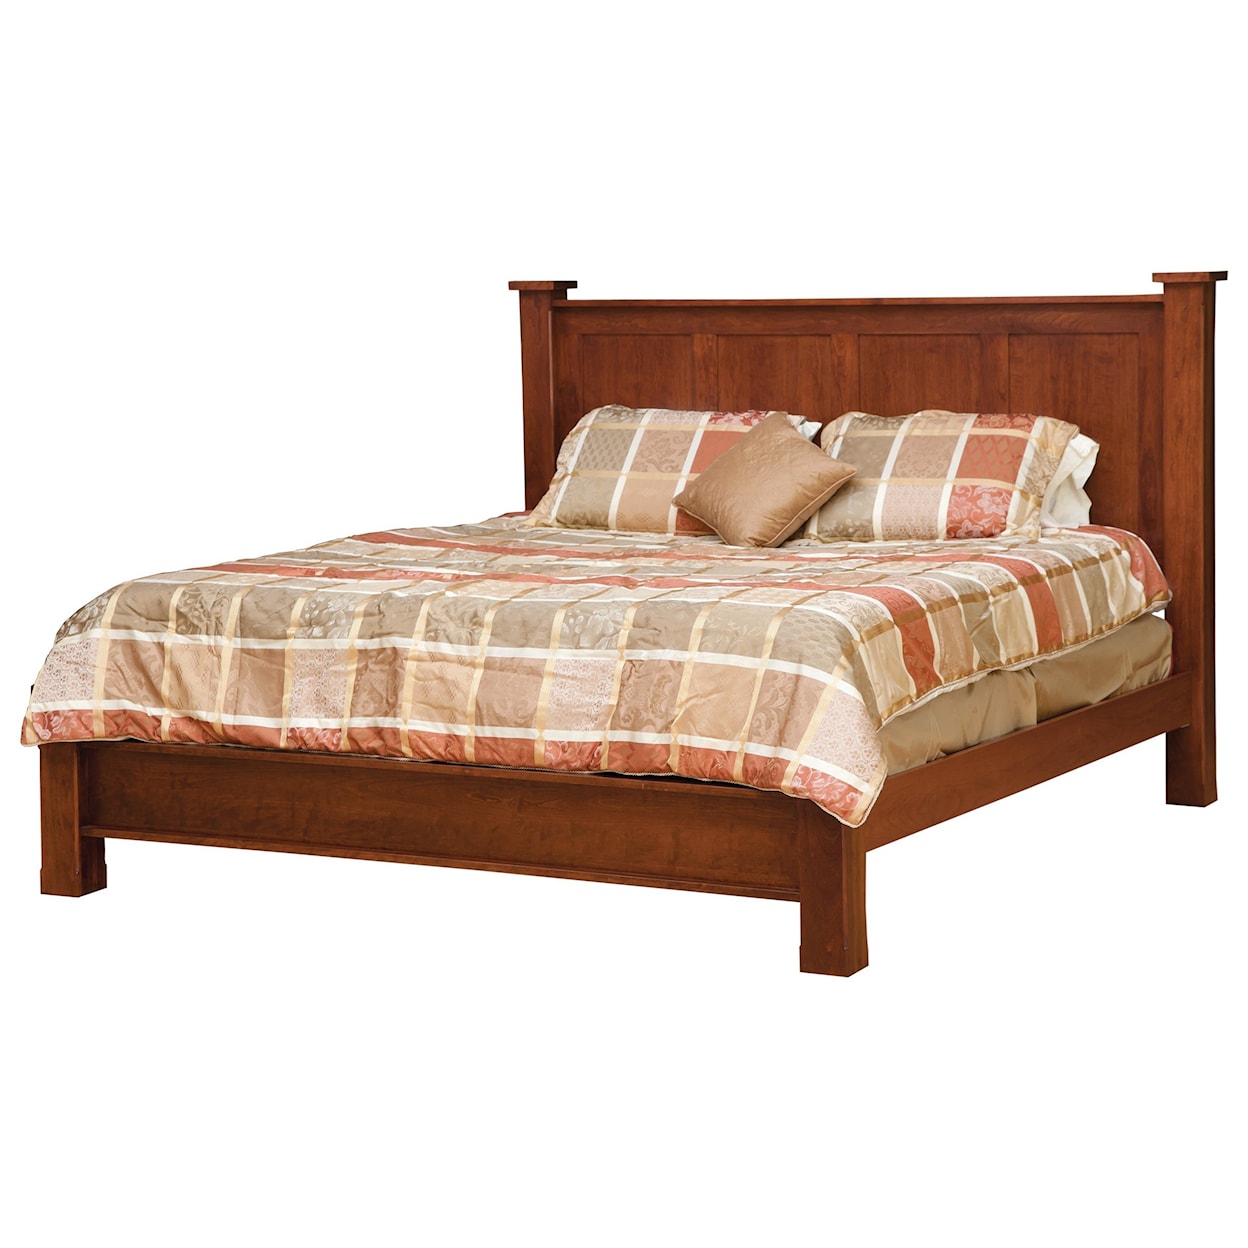 Daniels Amish Treasure Twin Bed with Low Footboard